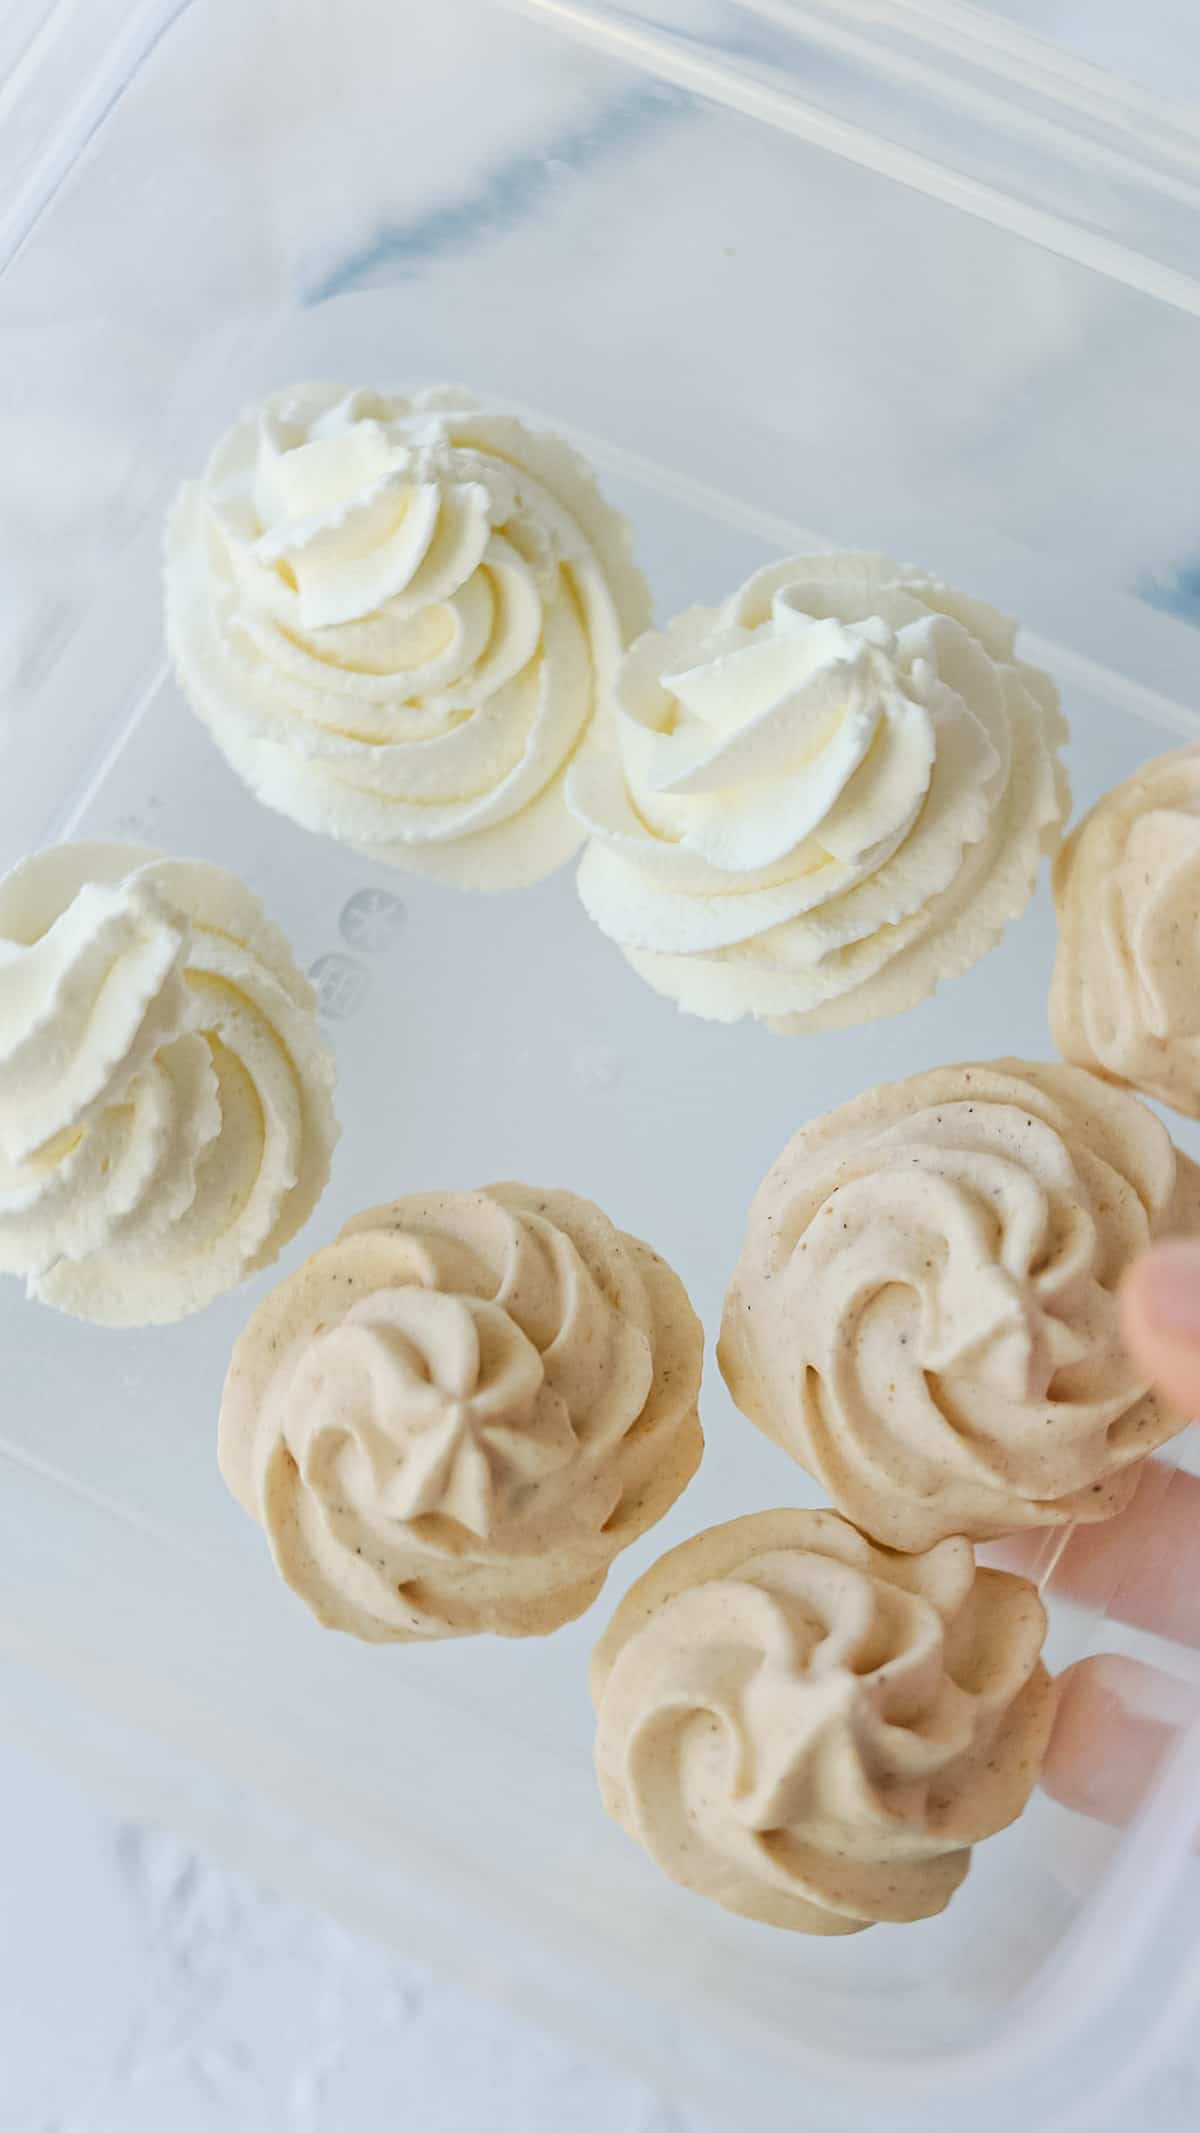 Whipped cream and pumpkin whipped cream rosettes in a plastic container.